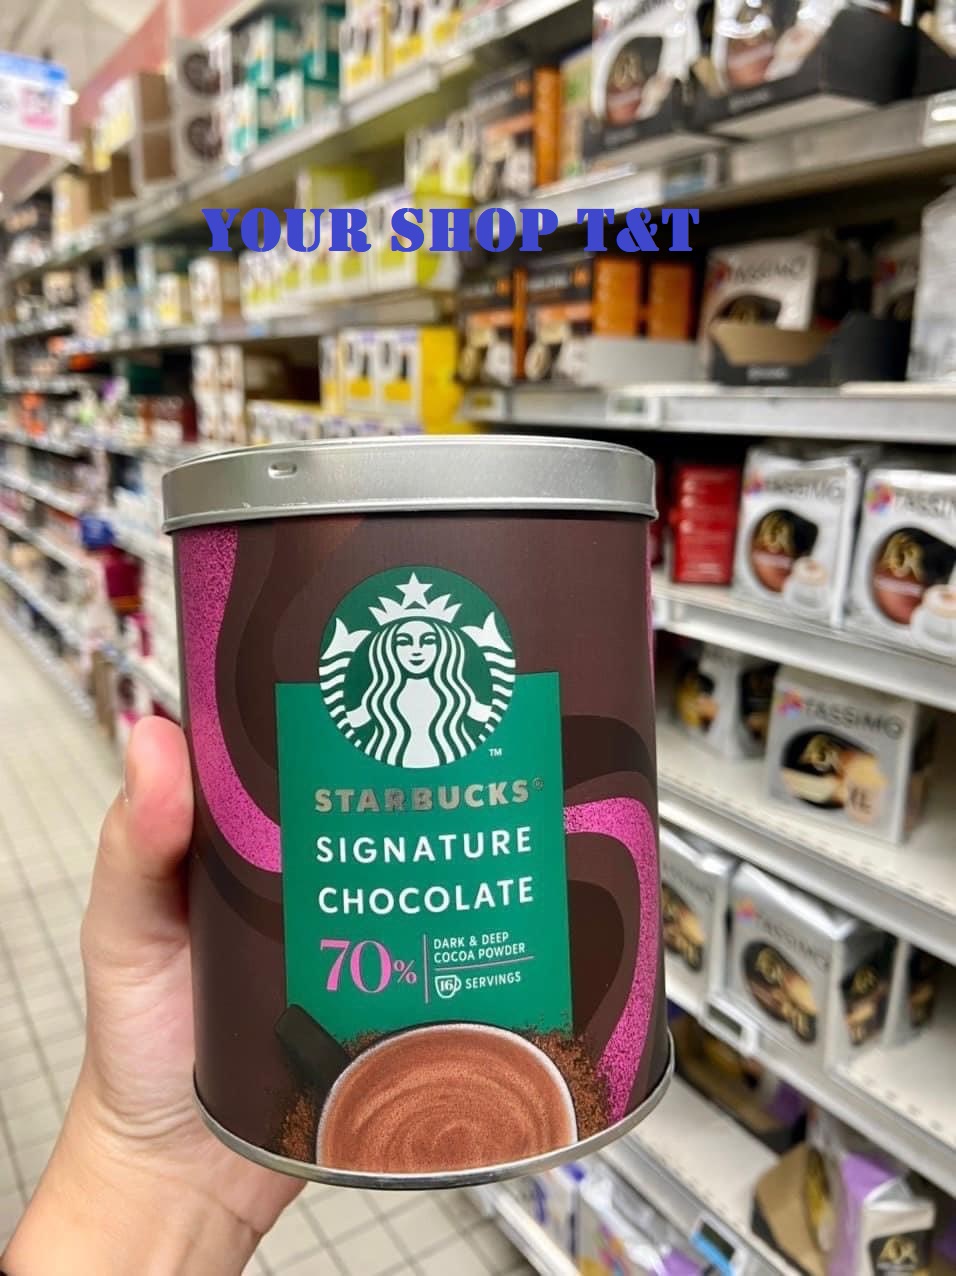 Starbuck Chocolate Signature cocoa powder 42% and 70% is delicious